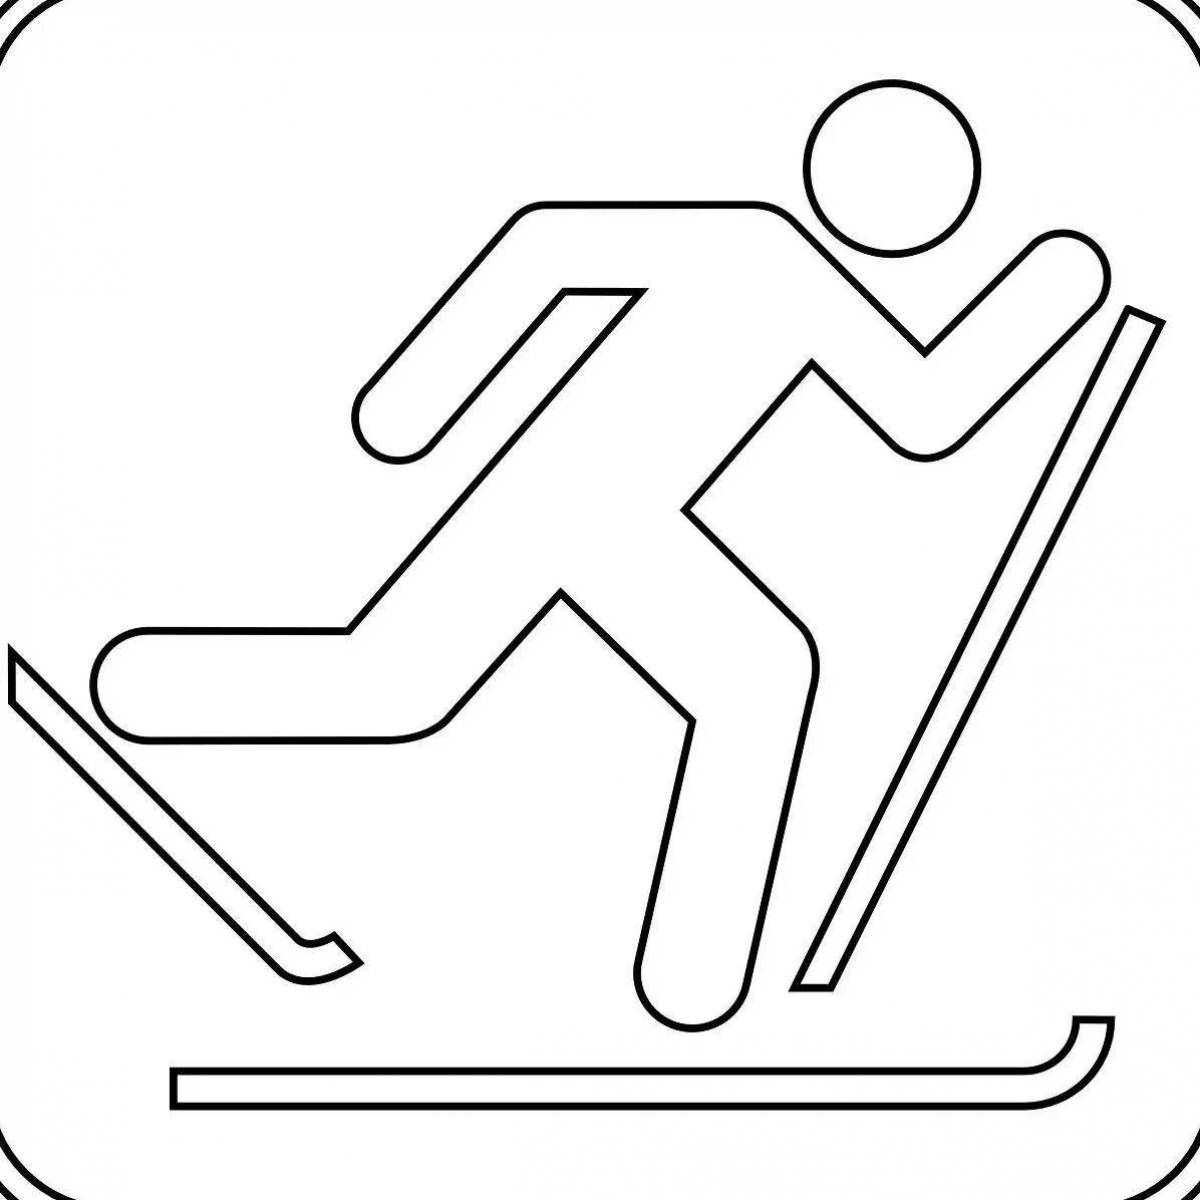 Coloring page tempting ski race